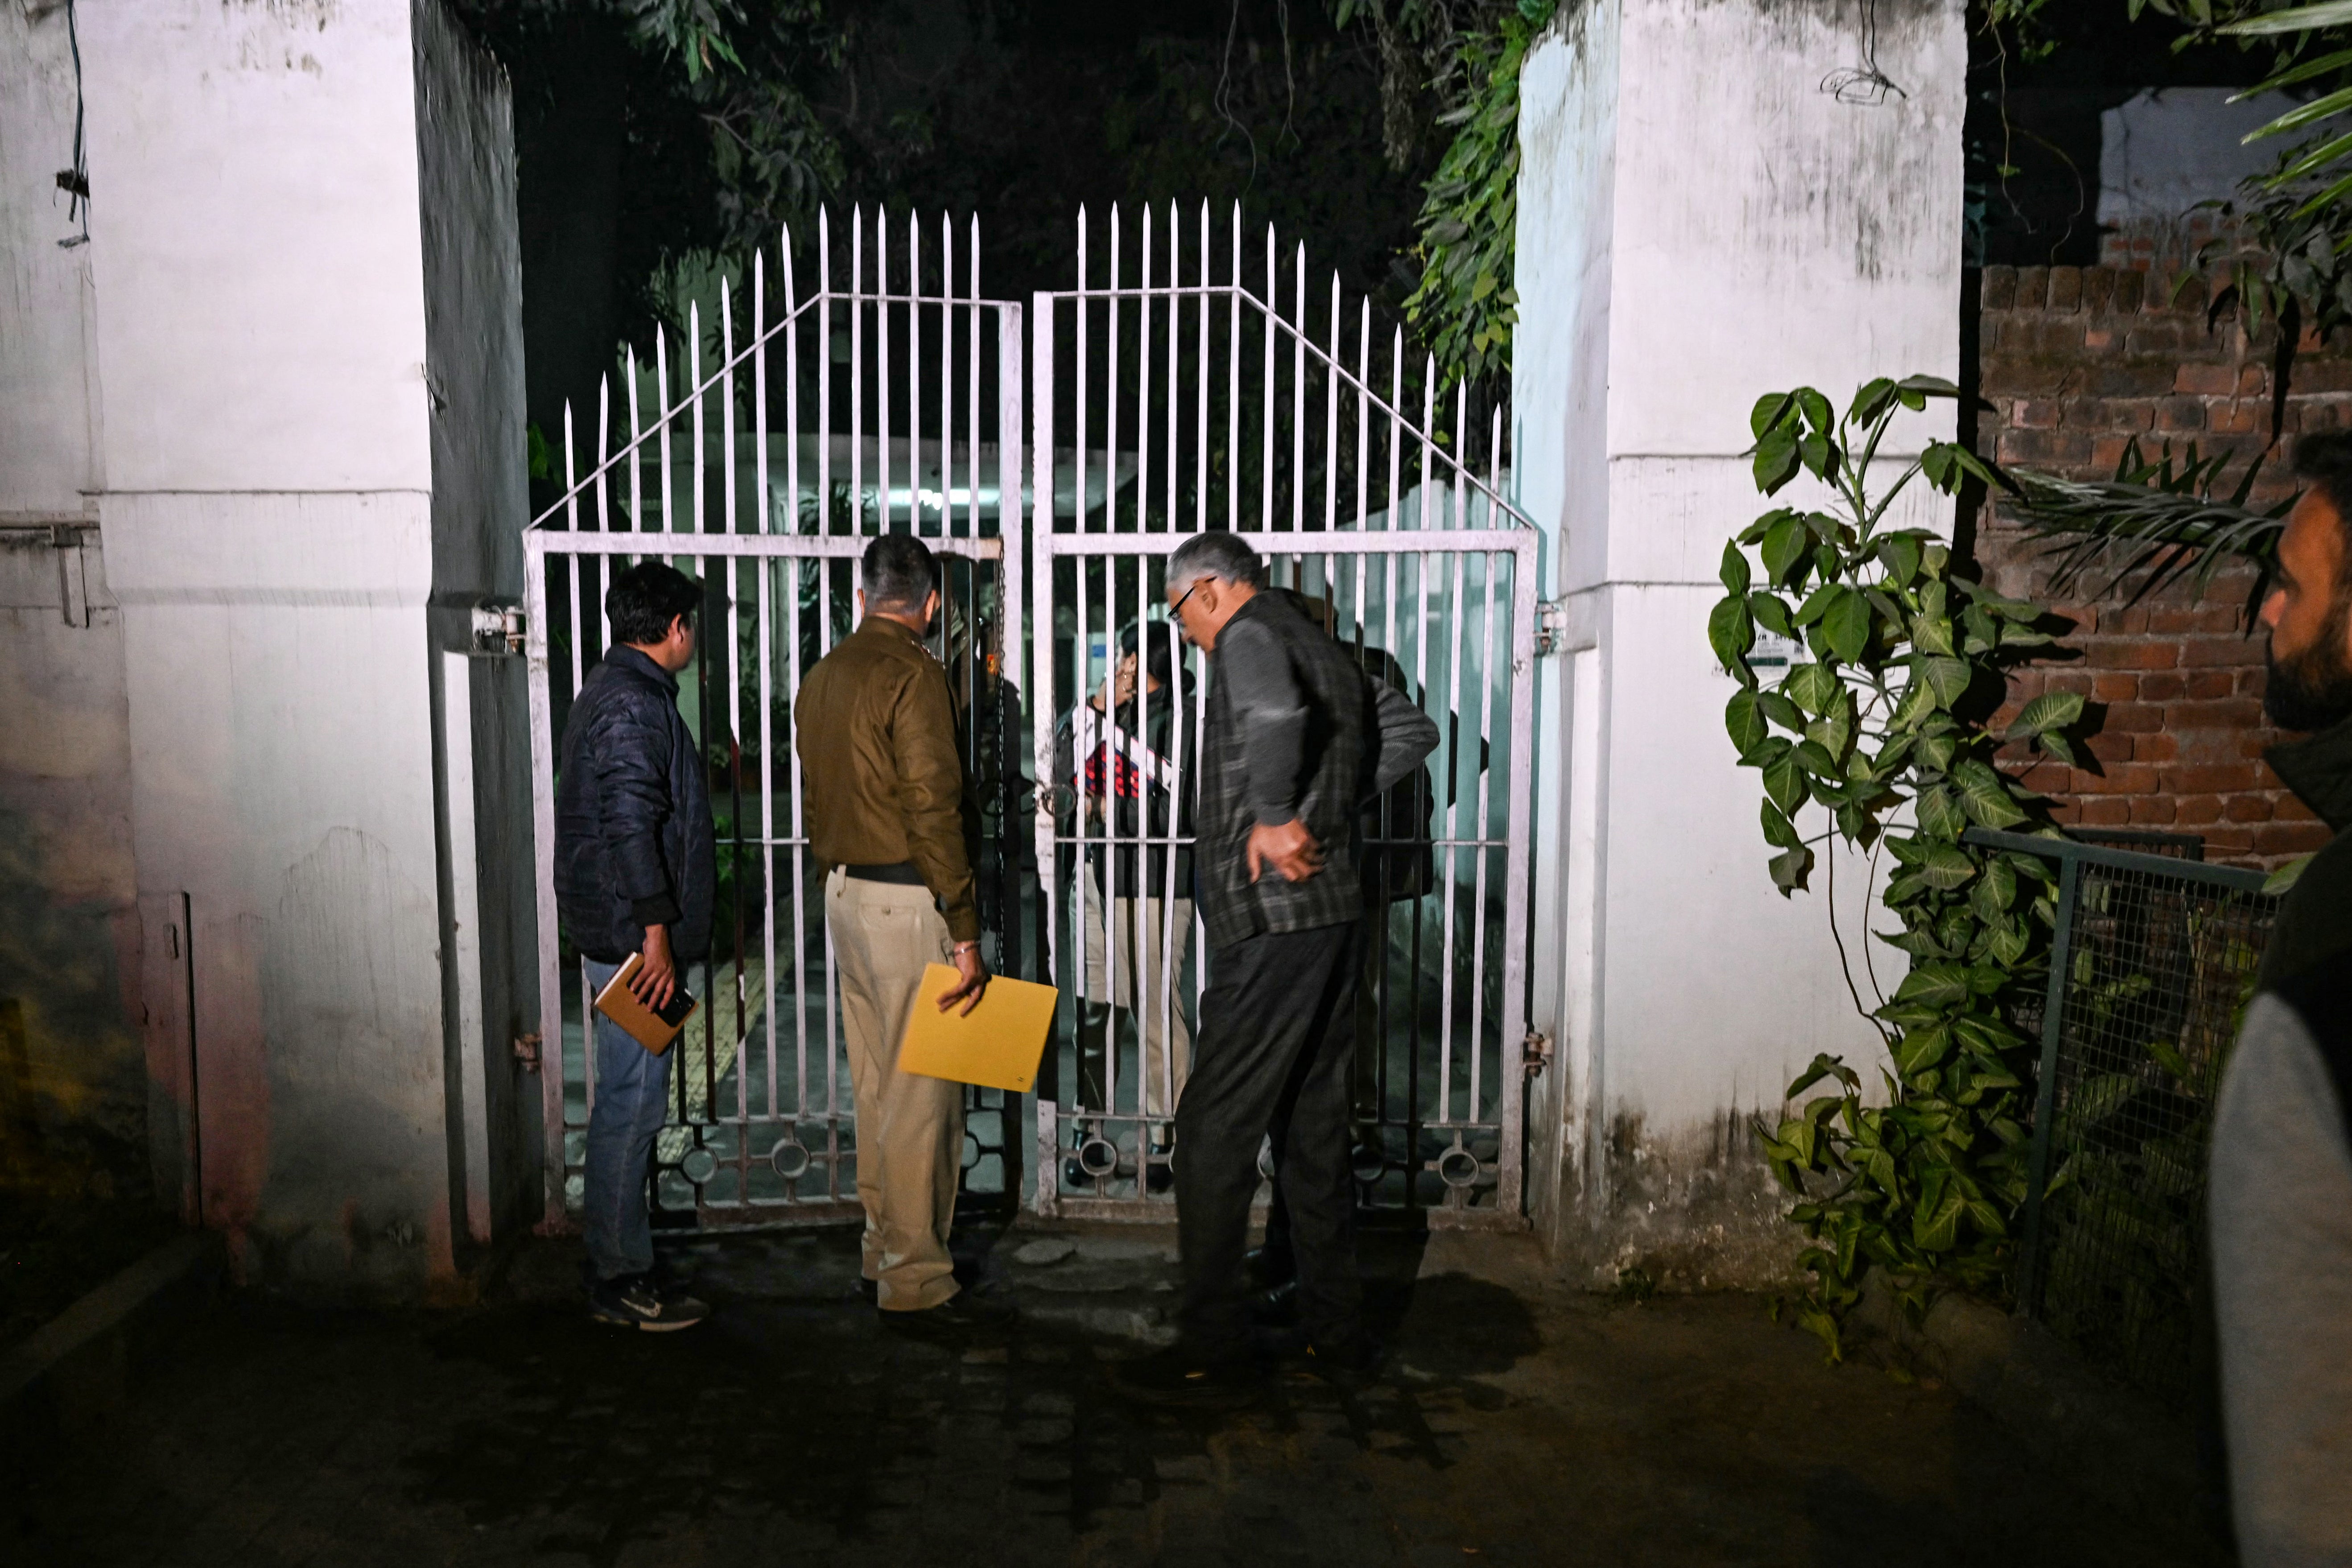 Police personnel conduct an investigation after an alleged explosion took place near the Israeli embassy in New Delhi